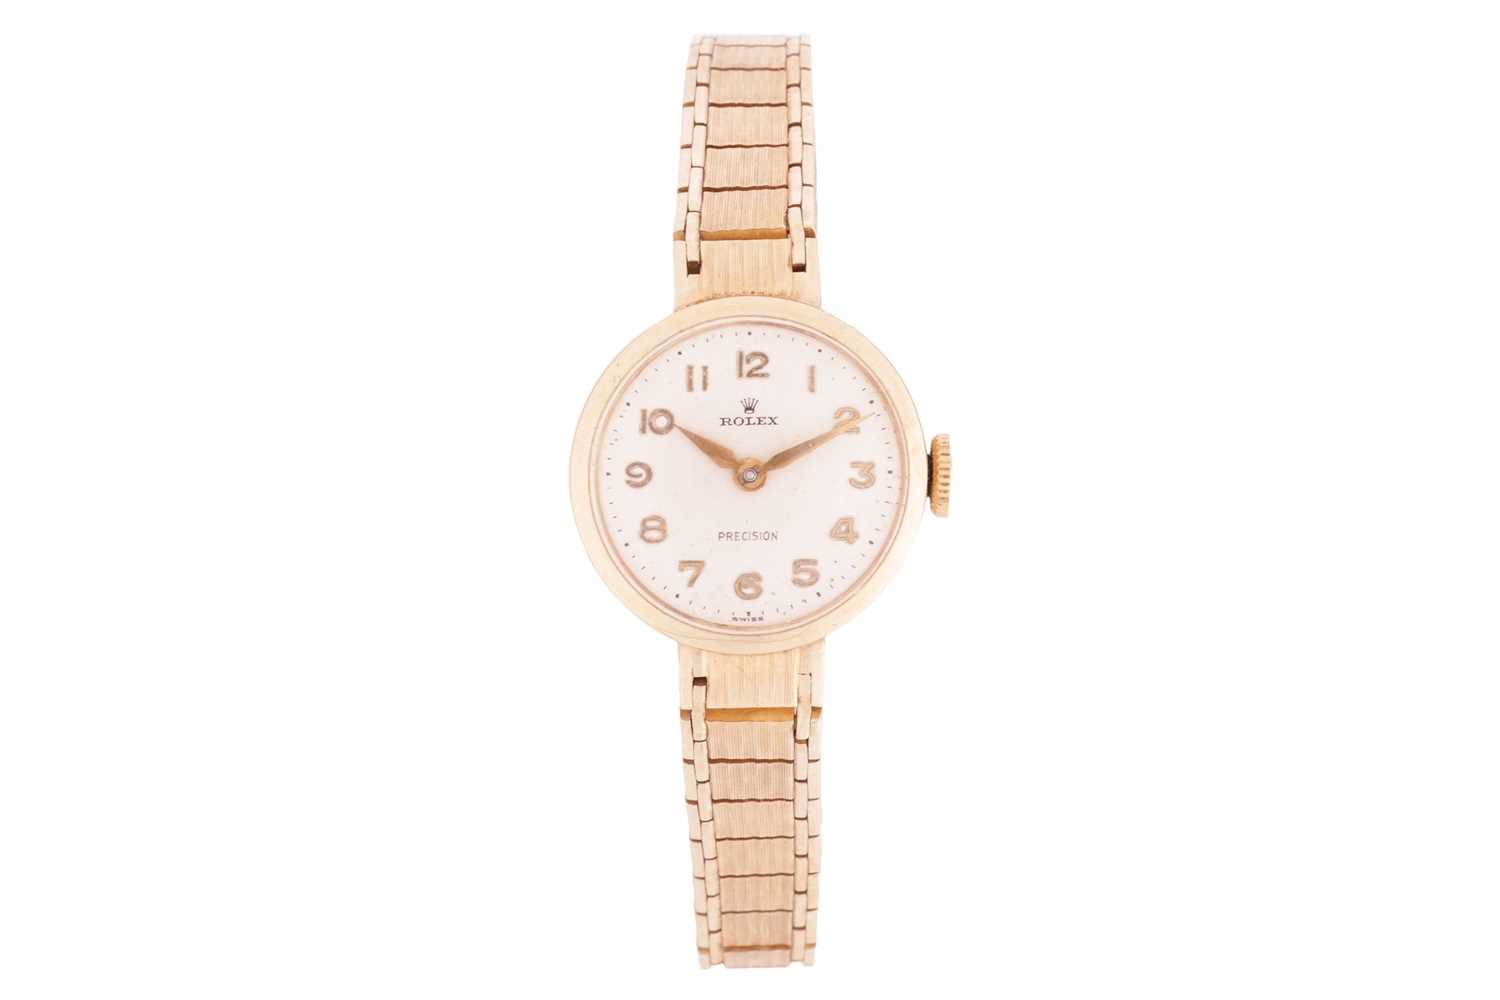 A Rolex Precision lady's gold dress watch. Case back number: 21275 Case Material: 9ct gold Case diam